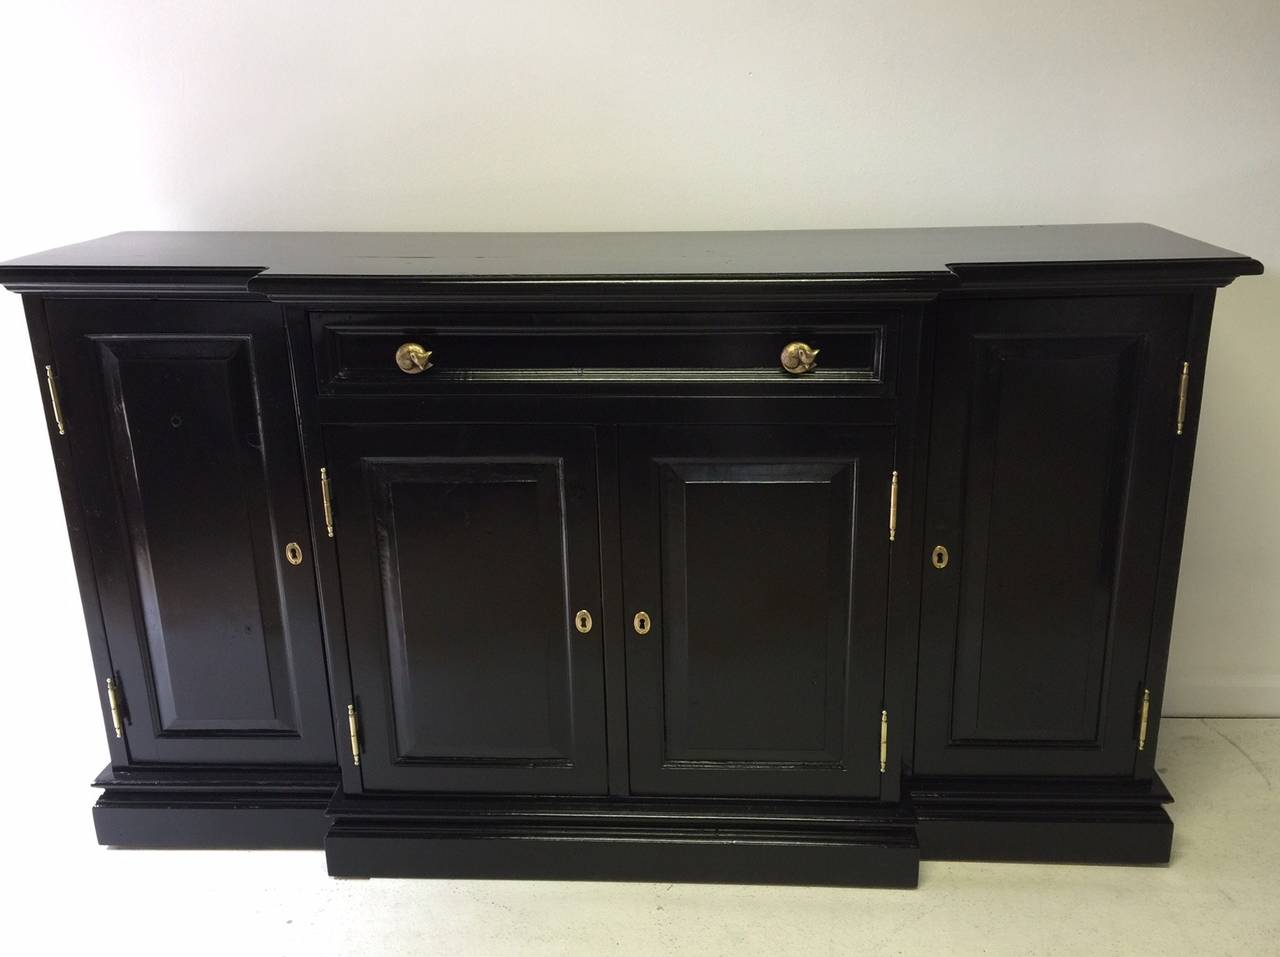 This is a vintage pine piece that has been newly lacquered in high gloss black. The interior was left unpainted to reveal the beautiful natural pine. One-drawer crosses the front, which stands out from the remainder of the piece about 4 inches. The